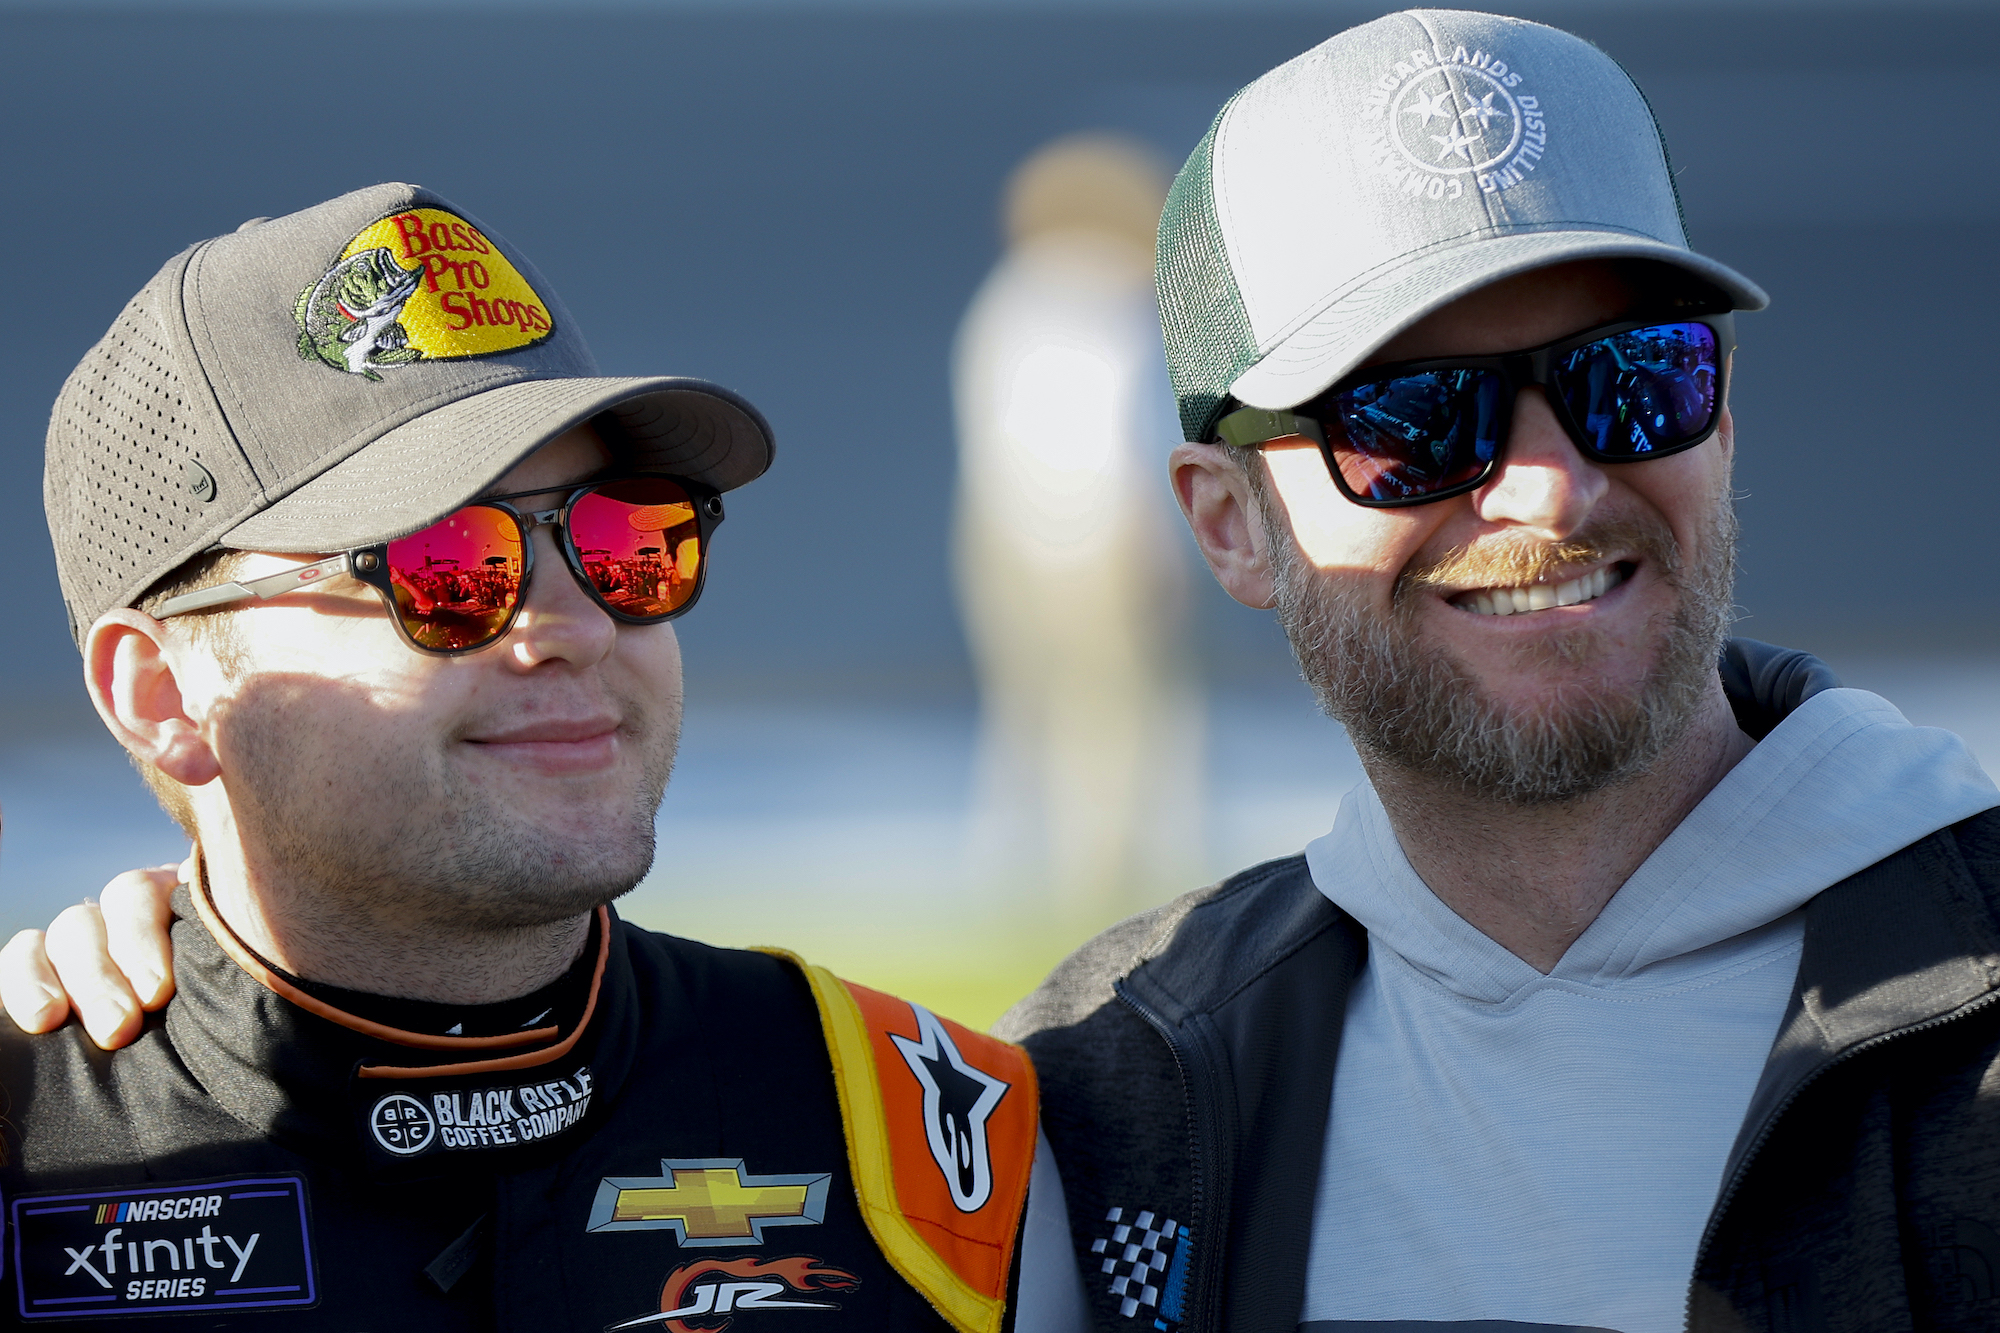 Dale Earnhardt Jr. Doesn’t Mince Words About Noah Gragson’s Move at Road America and Calls Out NASCAR for Not Penalizing Him